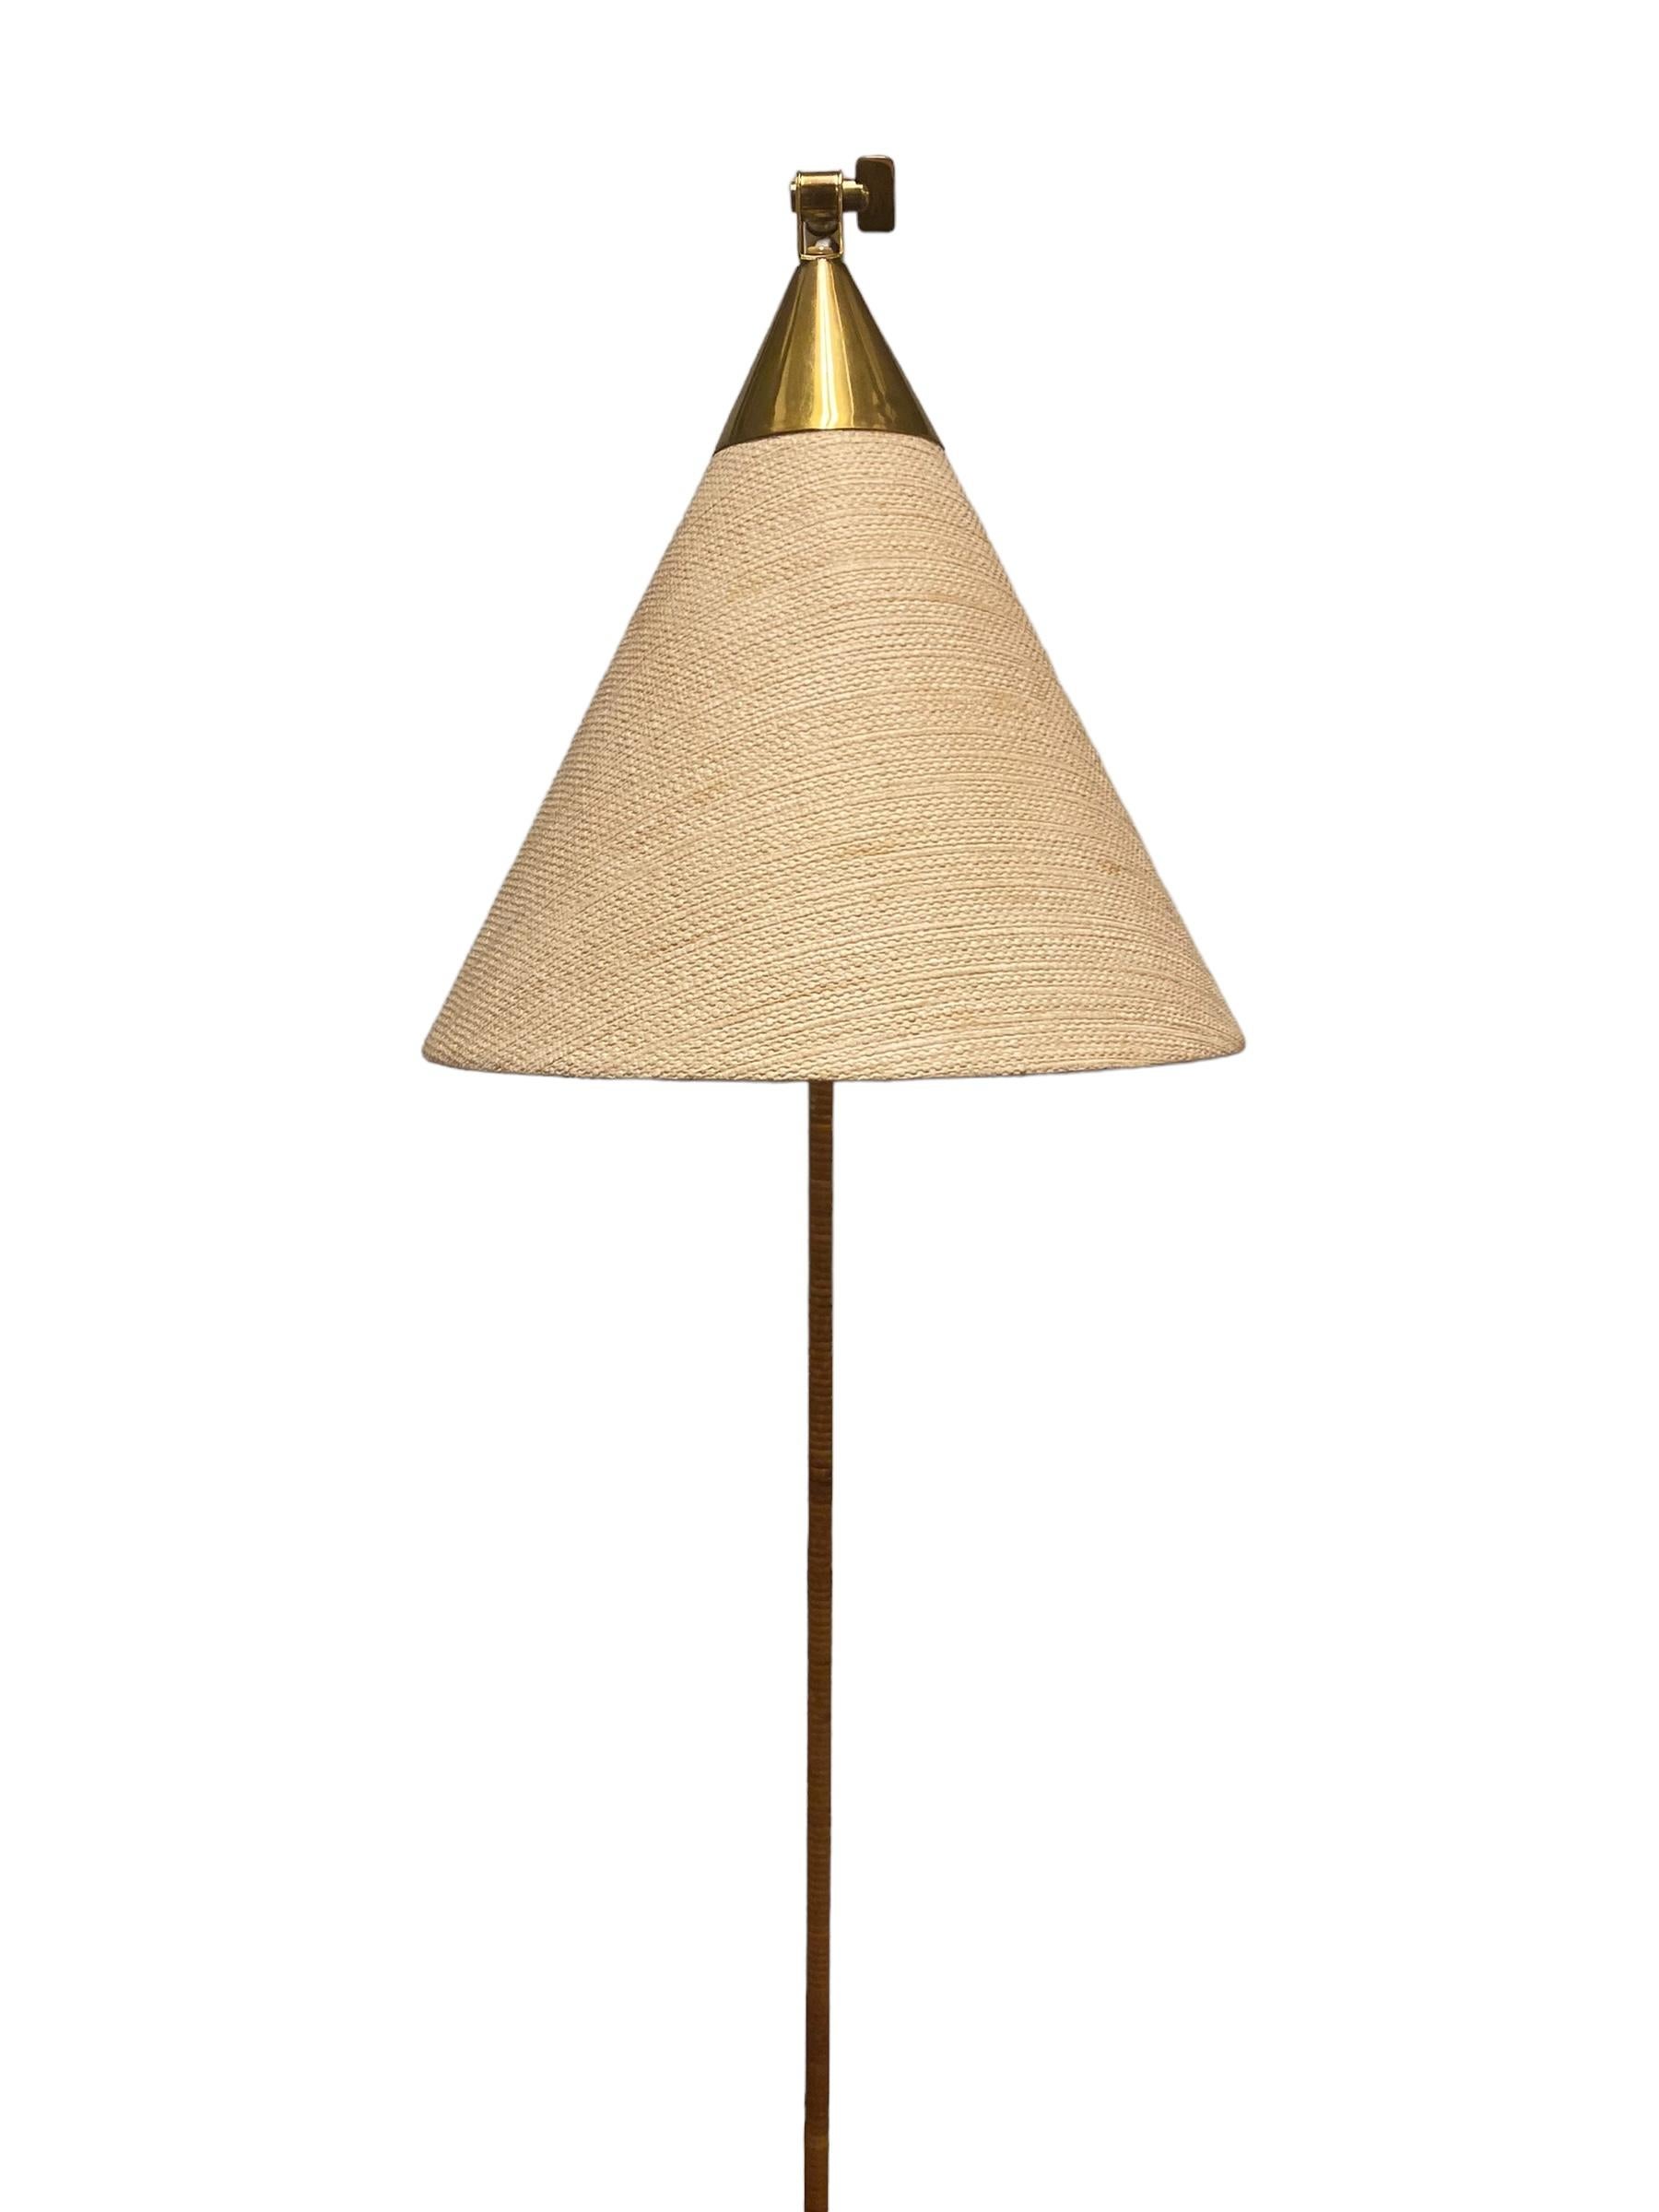 Brass A Beautiful Paavo Tynell Floor Lamp Model 9605 for Taito Oy, 1950s  For Sale